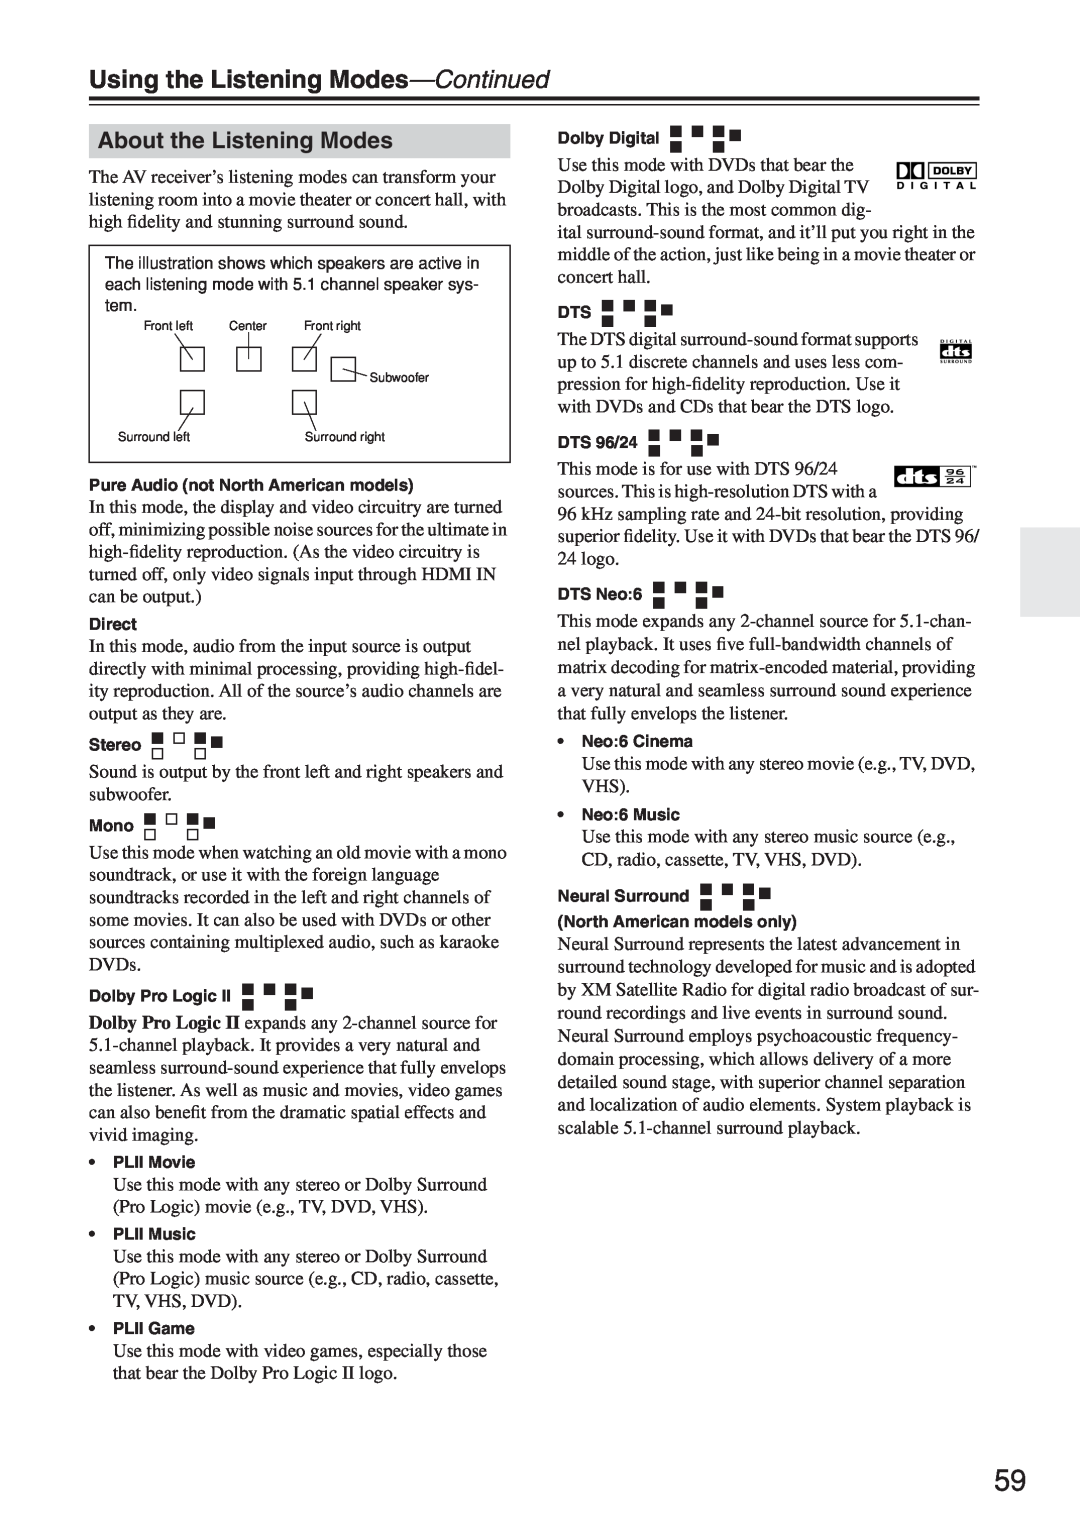 Onkyo HT-R640 instruction manual About the Listening Modes, Using the Listening Modes-Continued 